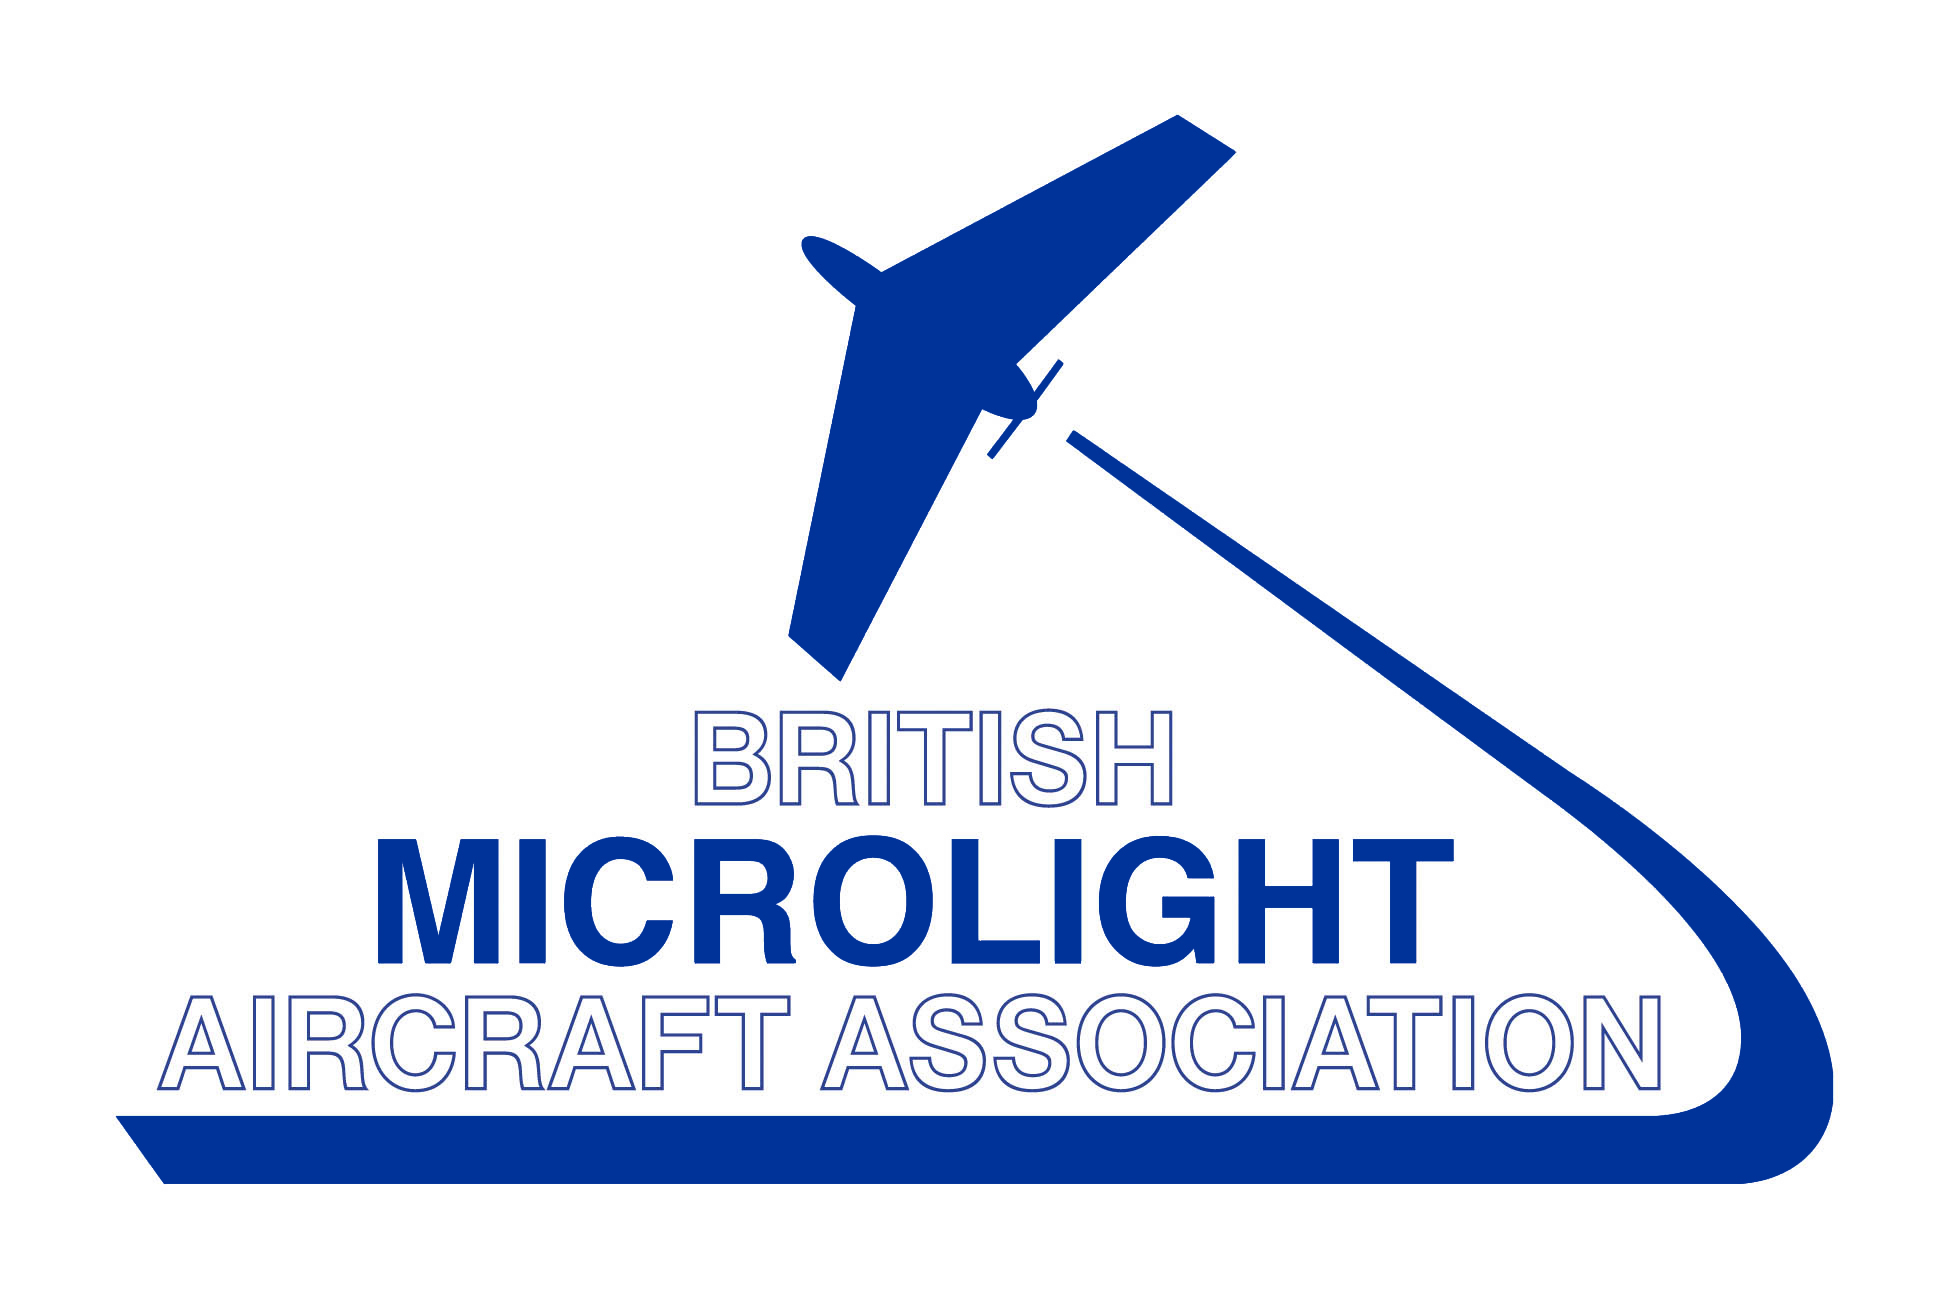 This club supports the British Microlight Aircraft Association. Click the link to find out more